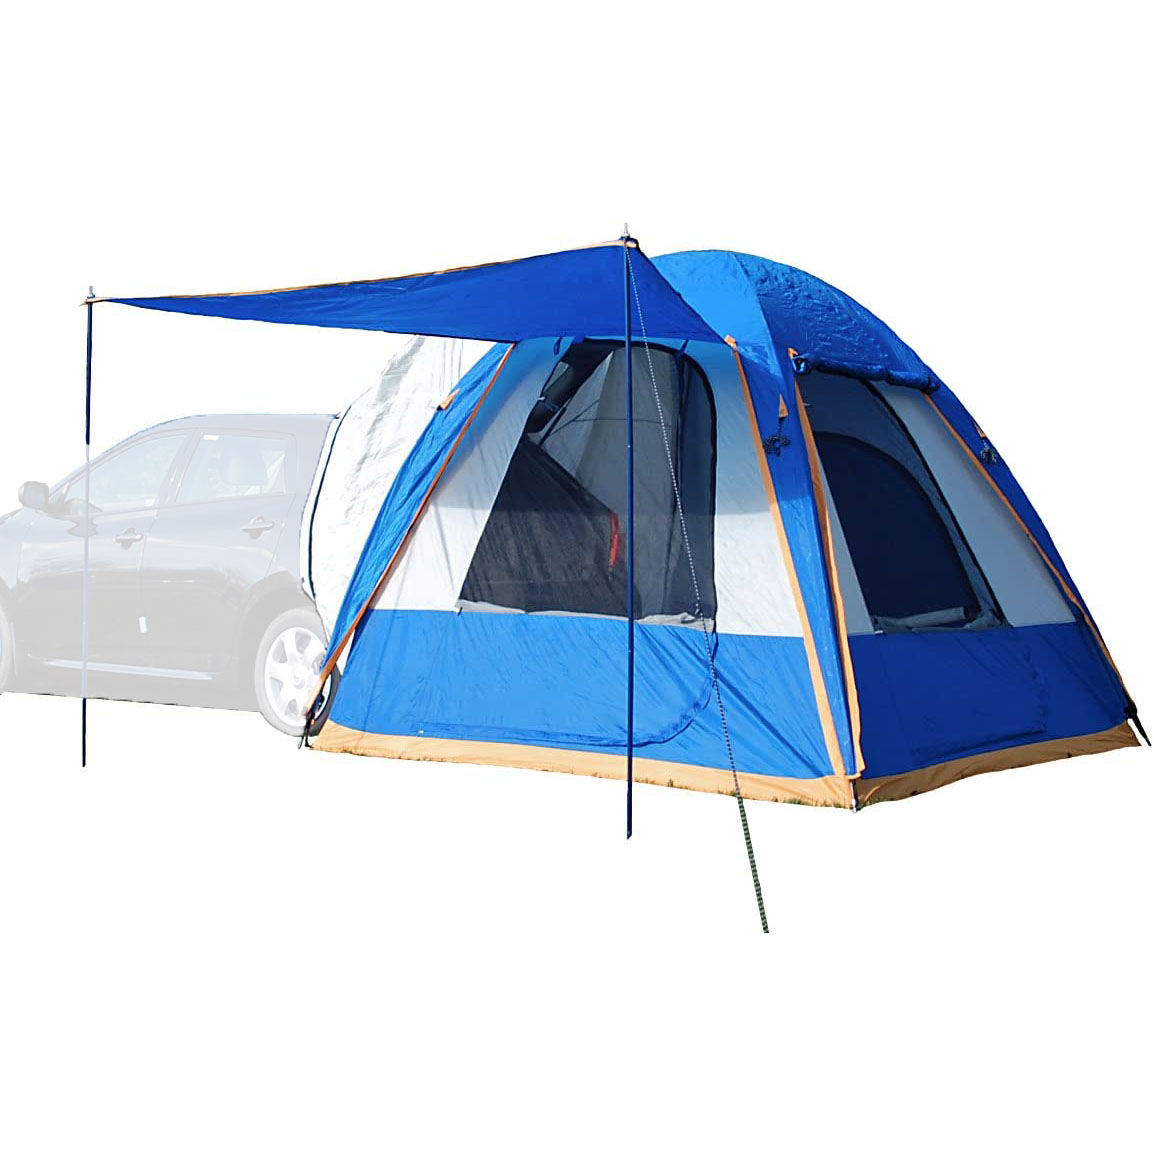 Napier Sportz Dome-To-Go Universal SUV Cargo 4 Person Camping Tent with Awning - image 1 of 7